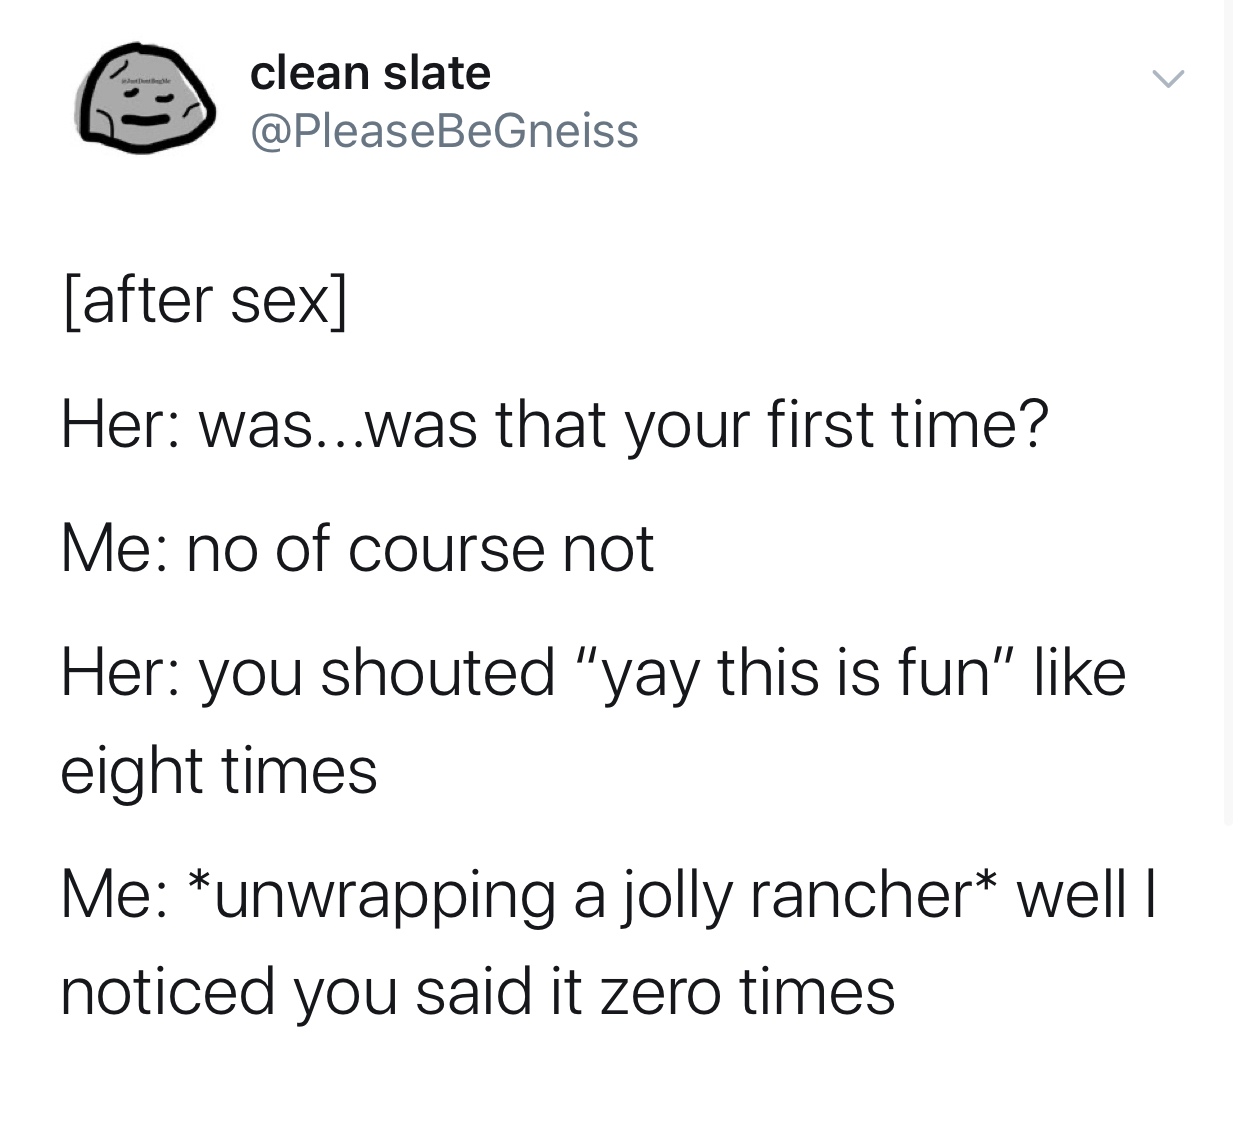 angle - clean slate clean slate after sex Her was...was that your first time? Me no of course not Her you shouted "yay this is fun" eight times Me unwrapping a jolly rancher well | noticed you said it zero times